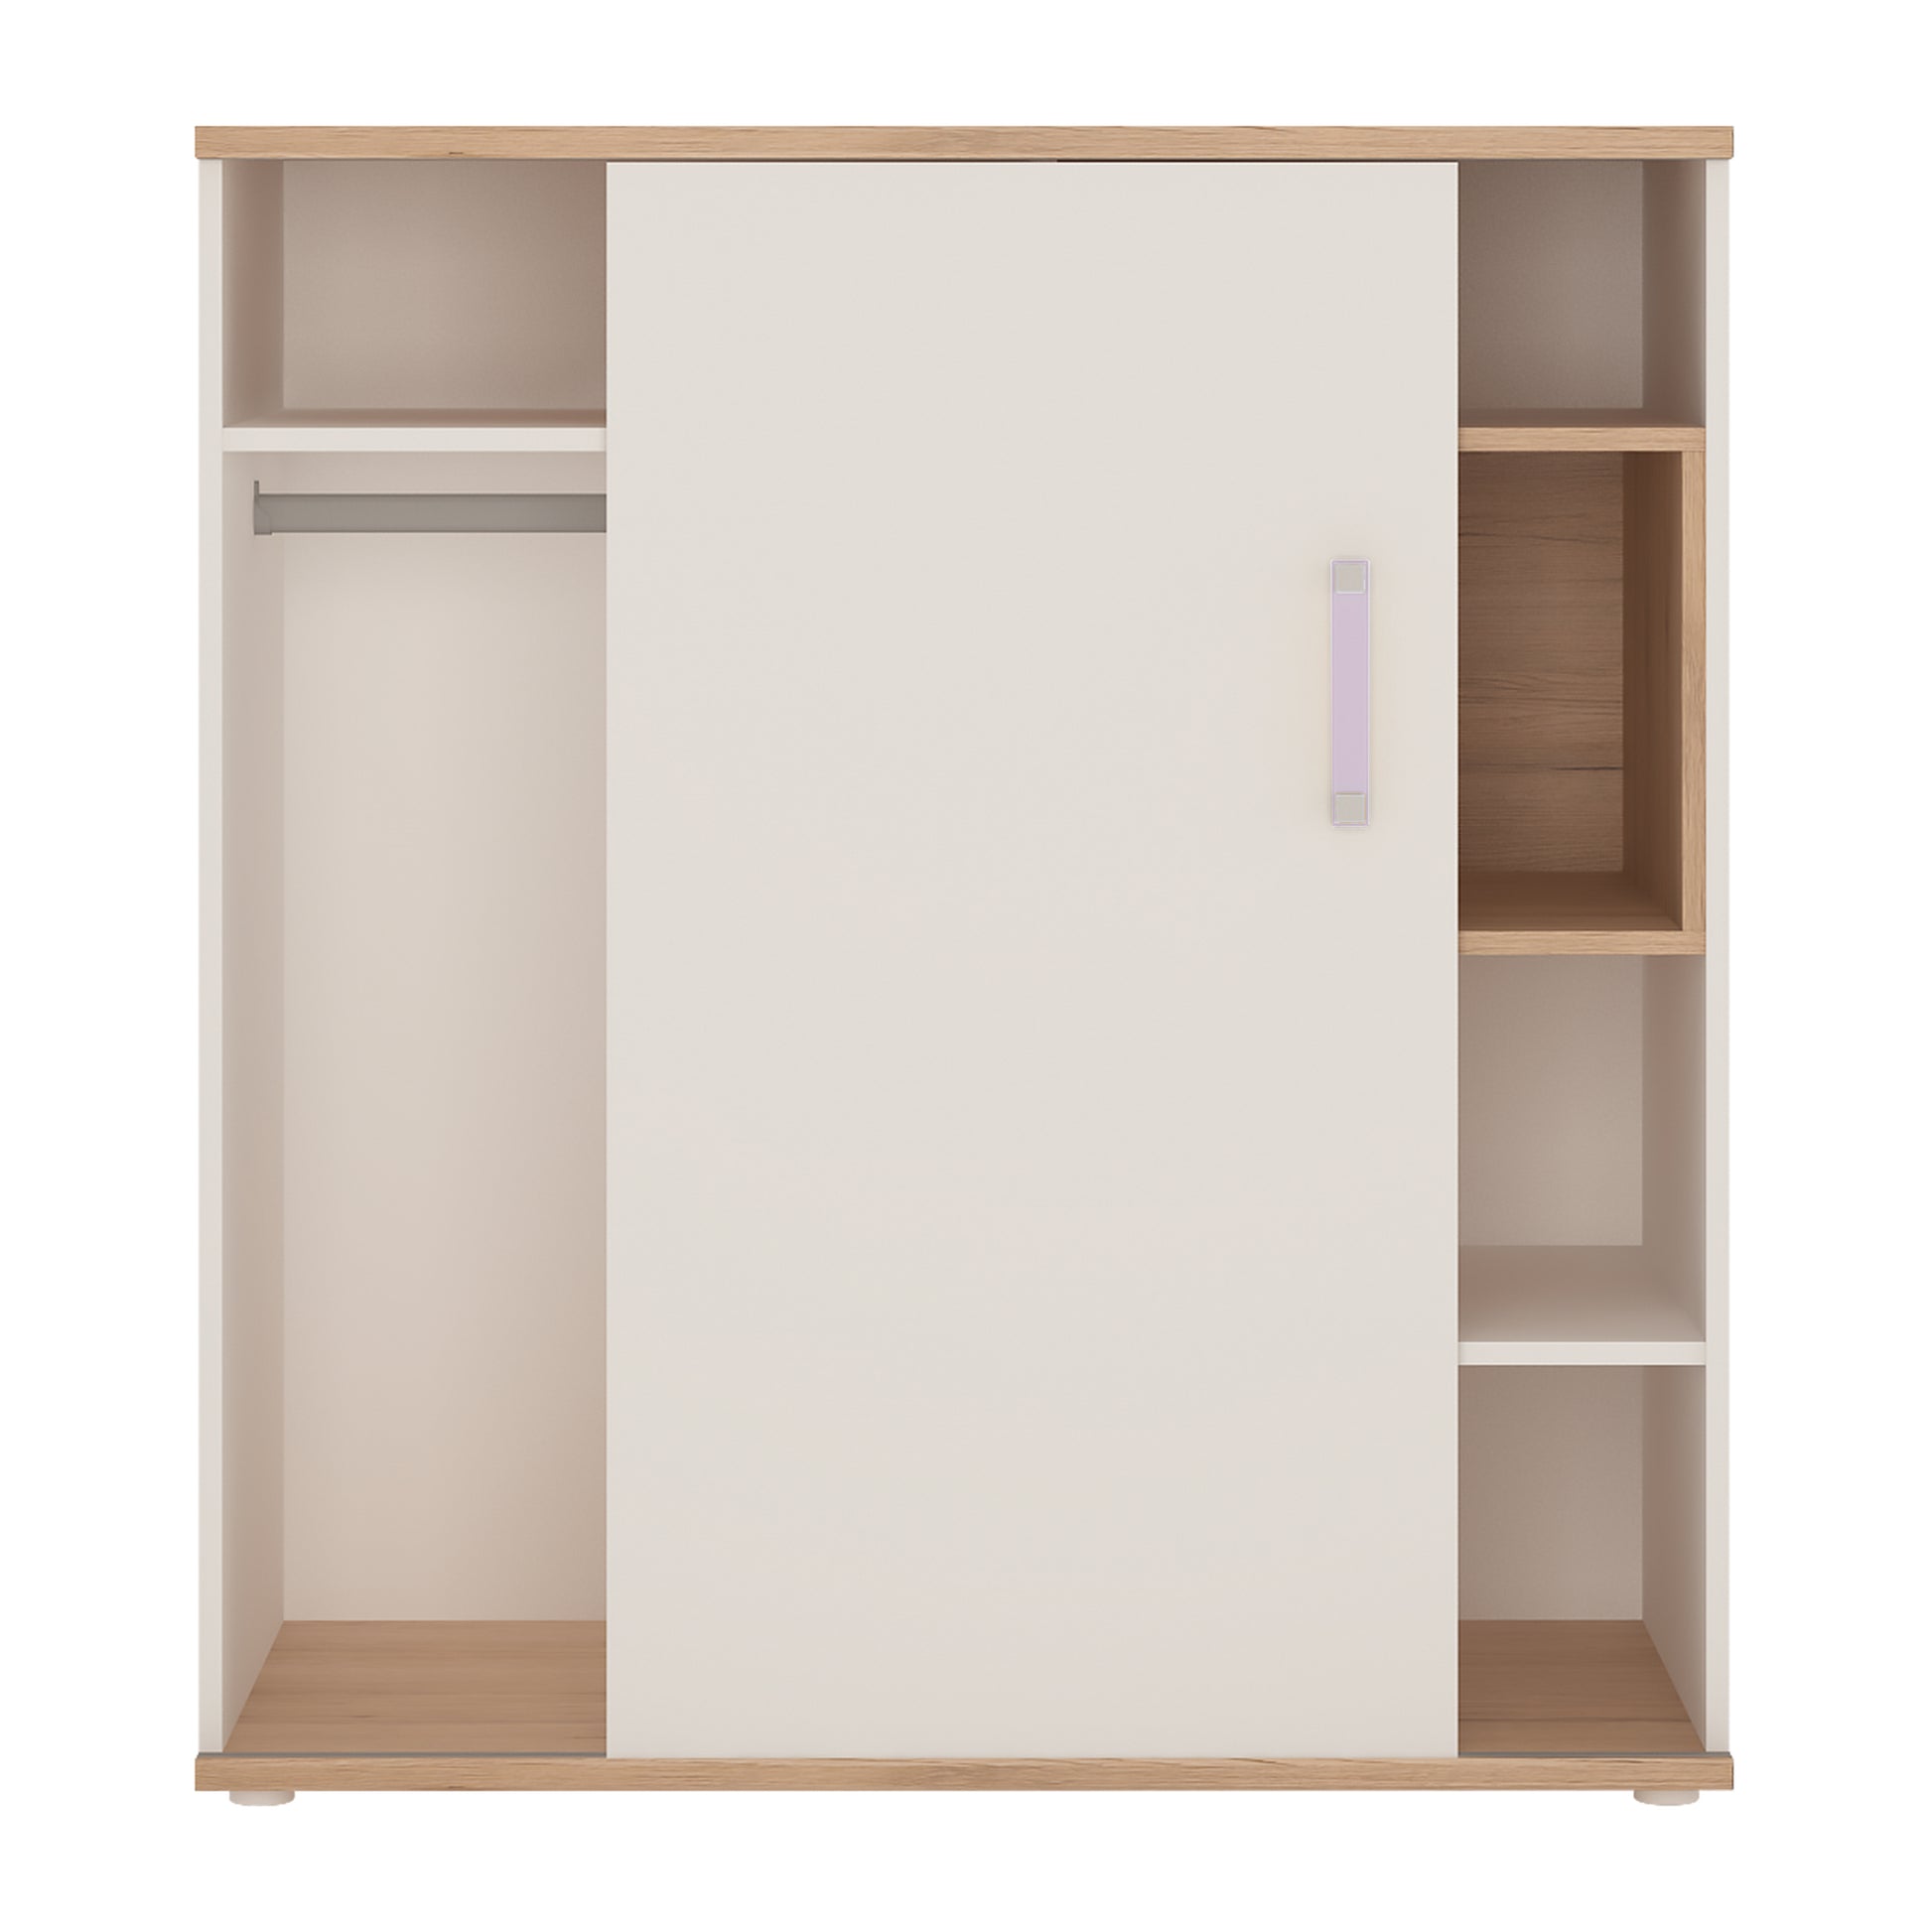 4Kids  Low Cabinet with shelves (Sliding Door) in Light Oak and white High Gloss (lilac handles)